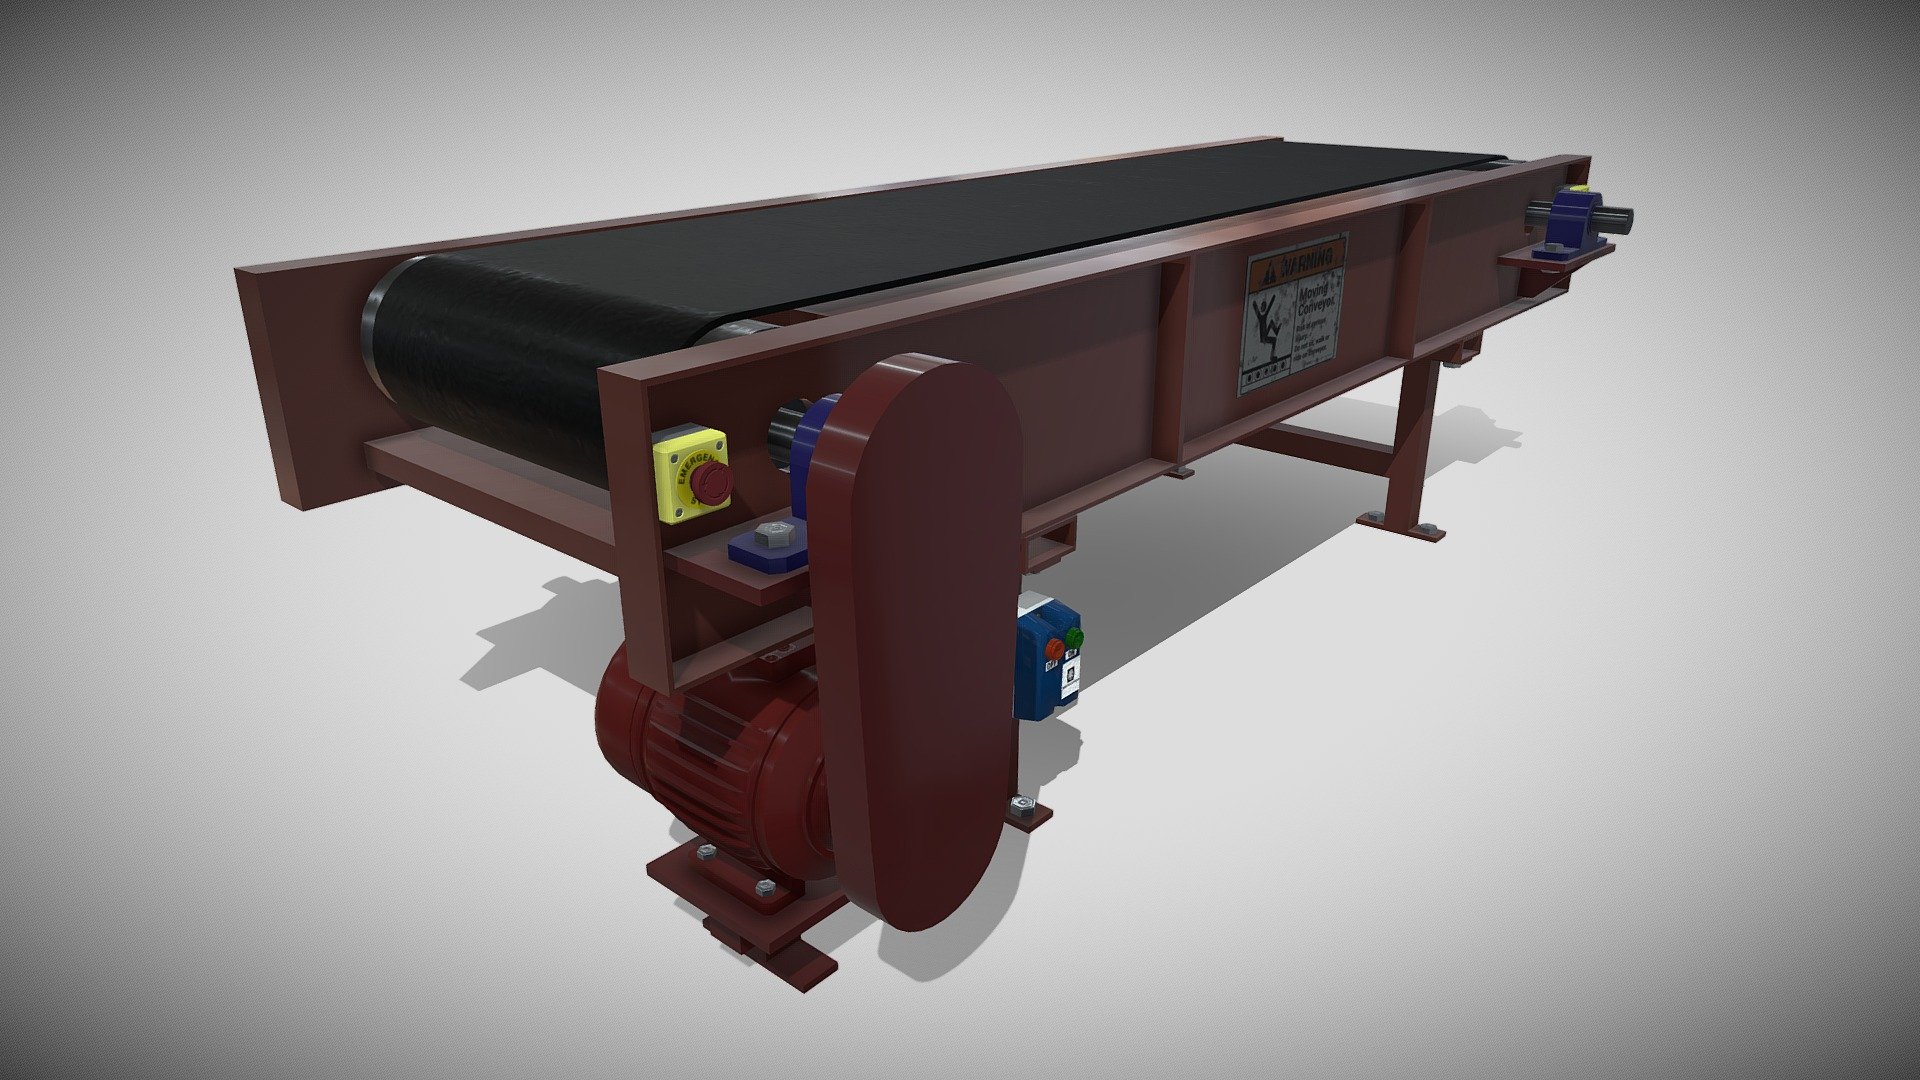 Low-poly Conveyor model

Single belt, Drive and tail pulley with DOL-stater and Emergency stop push buttons.

Electric motor driven with belt guard cover.

Model is PBR, OpenGL.

AR/ VR/ Unity &amp; Unreal Engine friendly

Game-ready, hand-painted using Substance Painter

Textures; 2048 x 2048, OpenGL, Dilation + Single Background Colour, 16 Pixel Padding

Maps Include; Base, Normal, Height, Rough, and Metal.

Please Note: This model contains holes. NOT for 3D printing 3d model